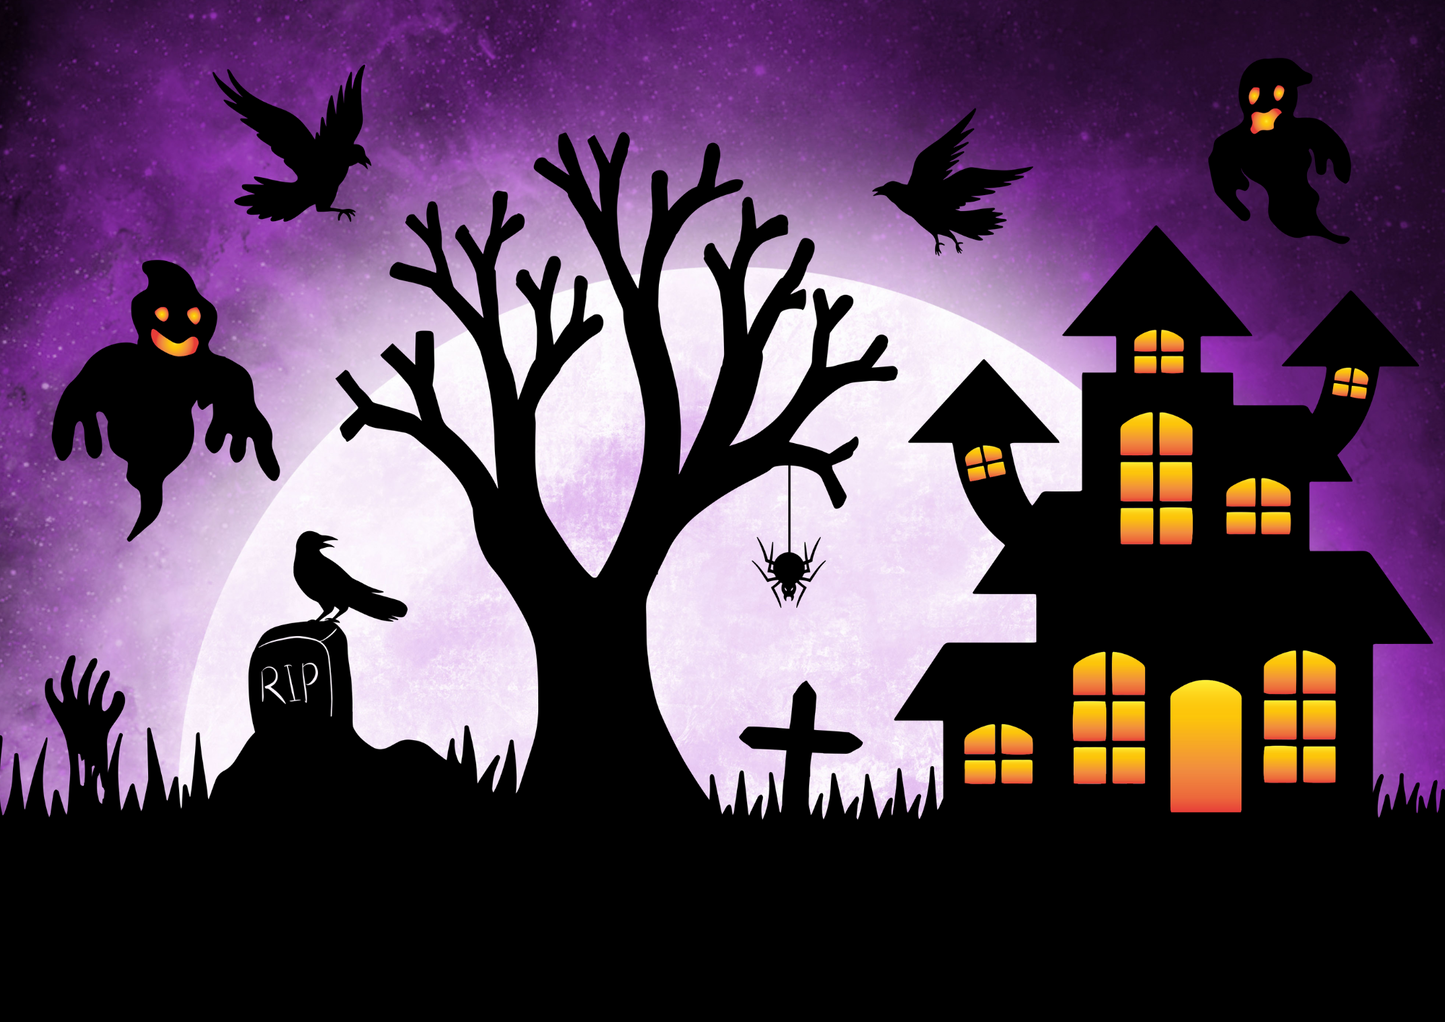 Purple image - creepy tree with spider on it, ghosts and ravens in air, creepy black house with yellow windows, gravetone